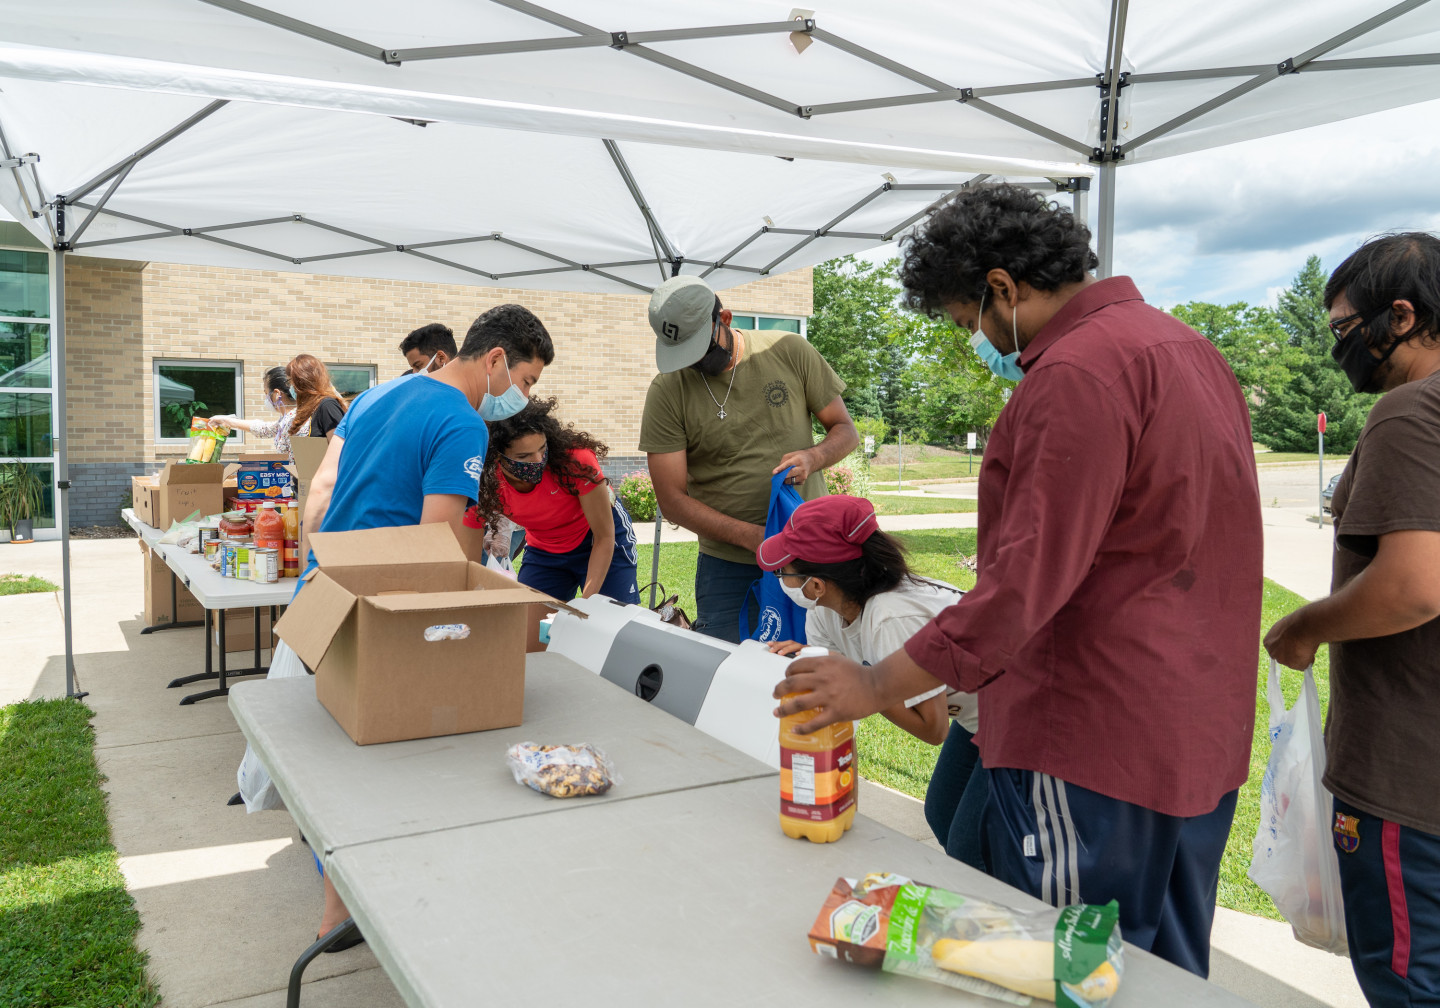 Volunteers wearing masks organize food under a tent at a collection event.